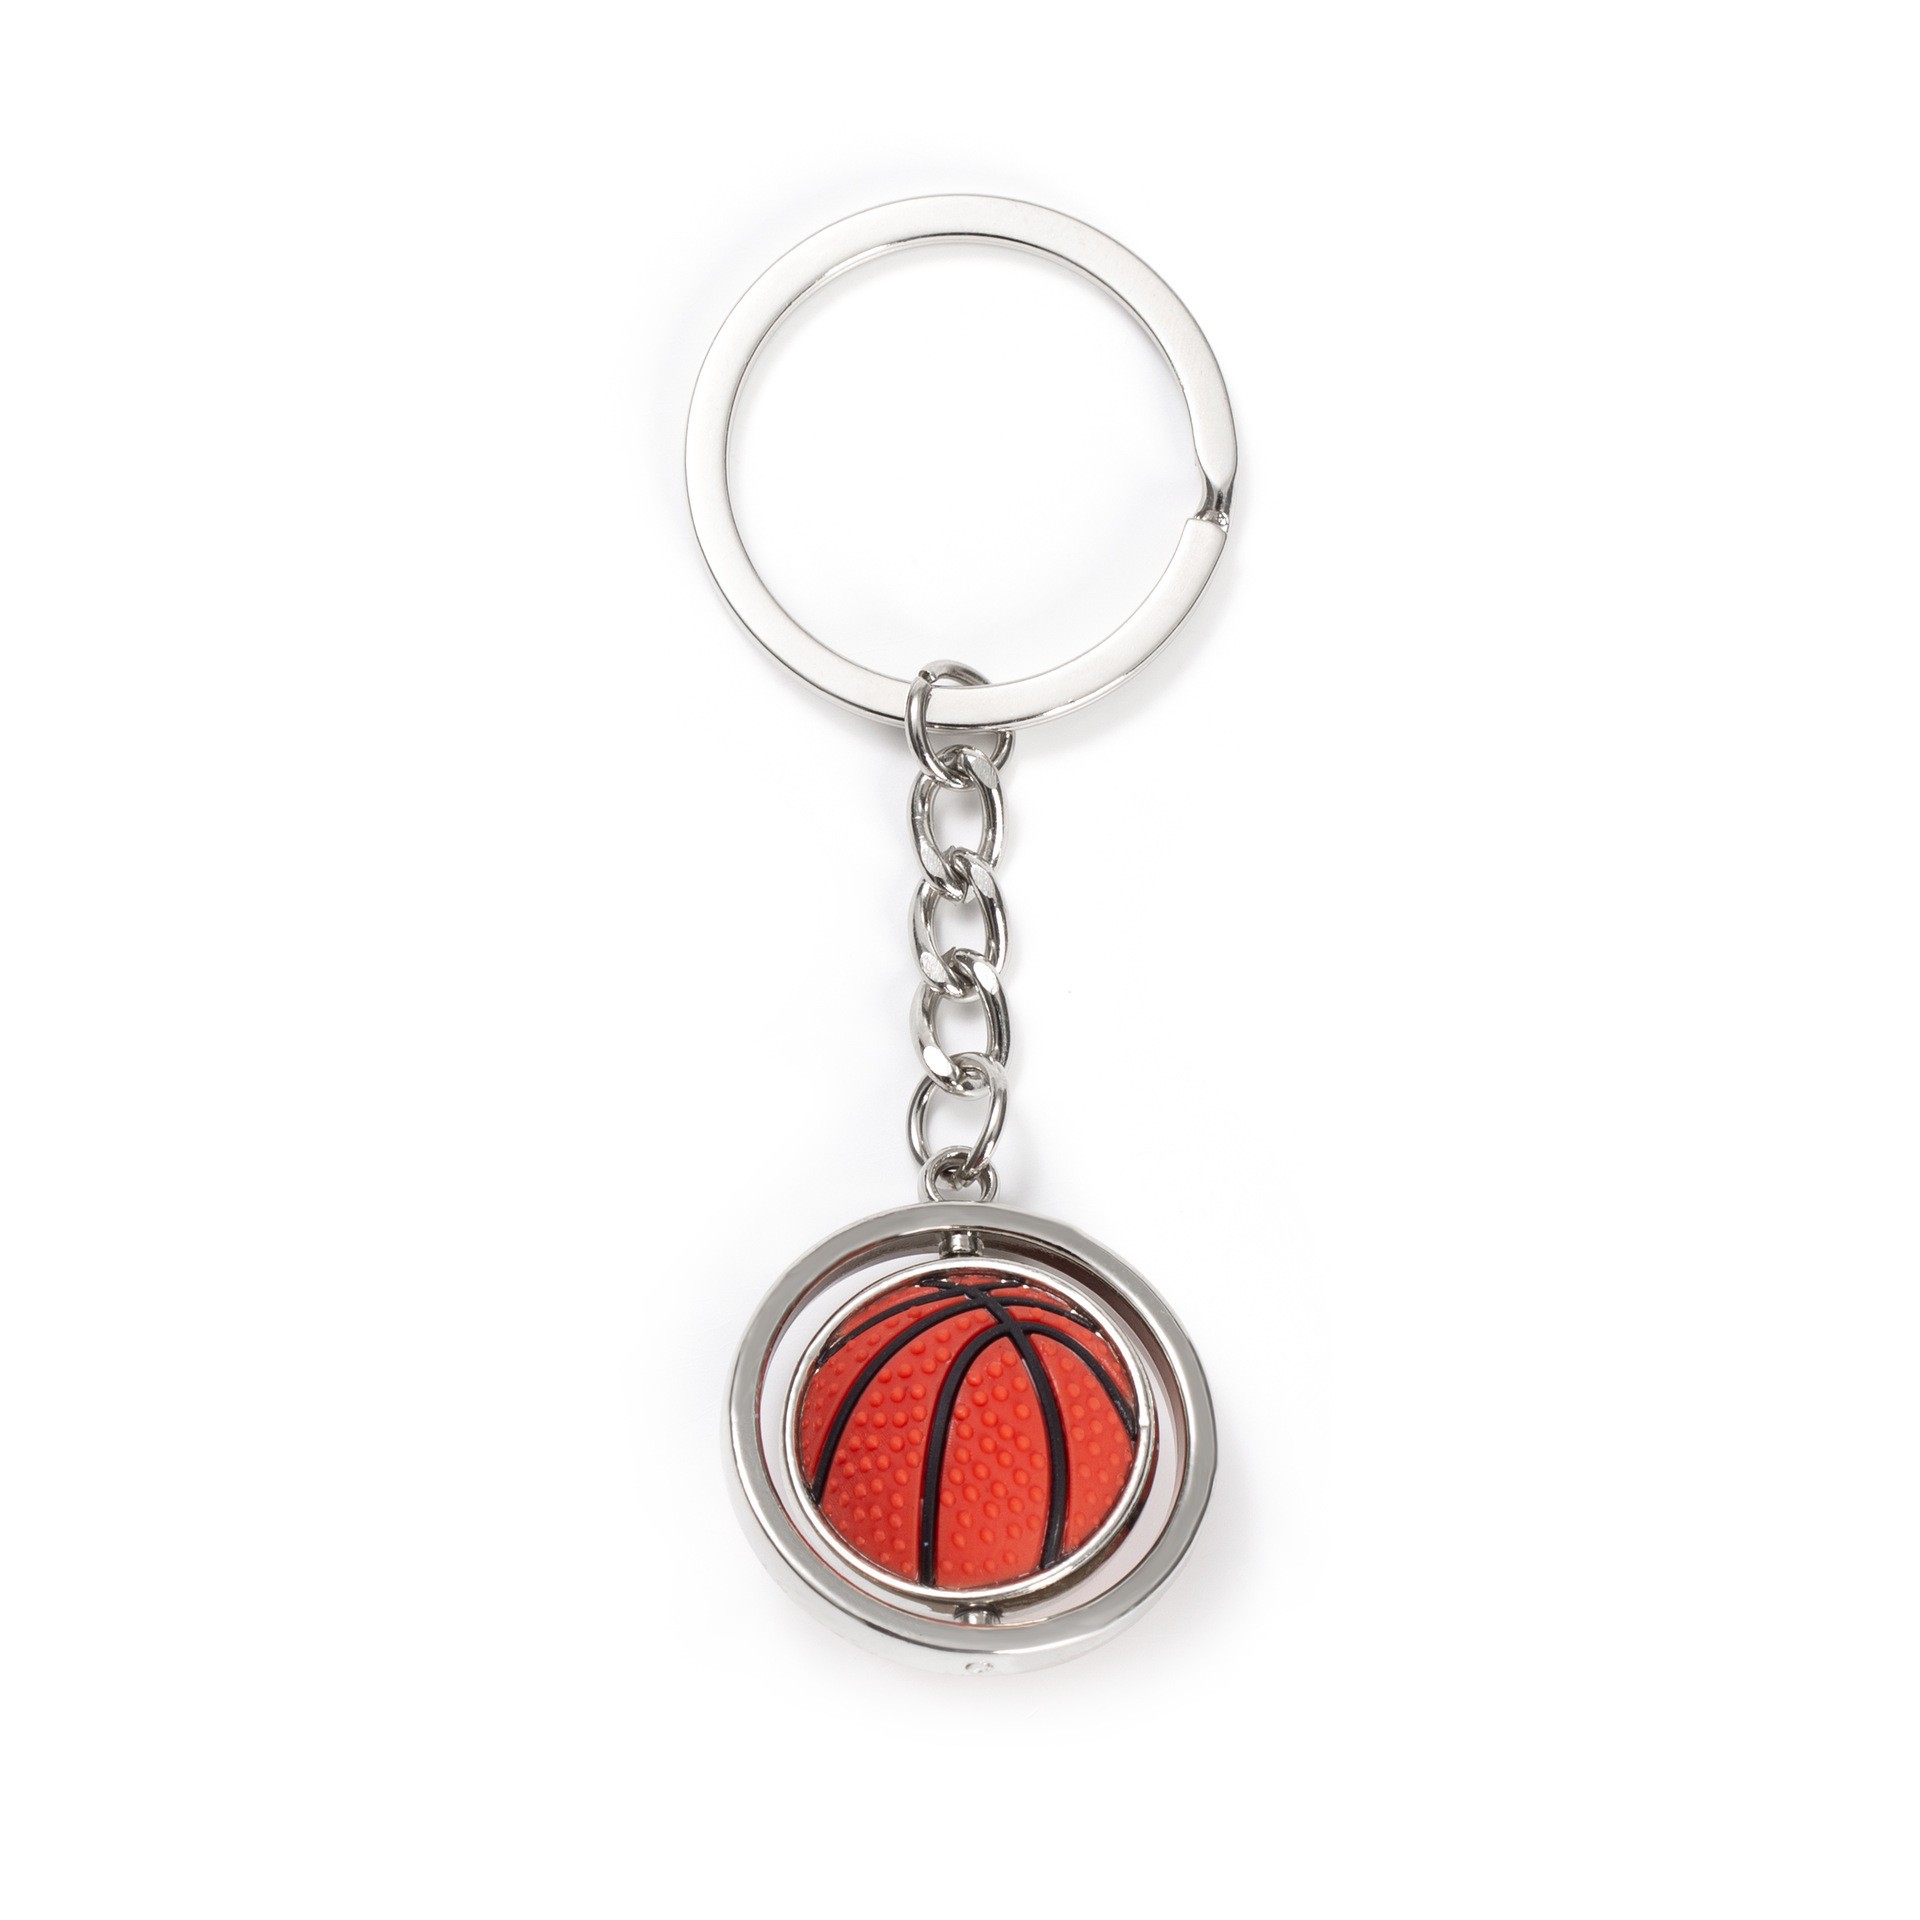 Personalized Creative Double-Sided Basketball Rotating Metal Keychains Can Carve Writing Logo Sports Event Promotional Gifts